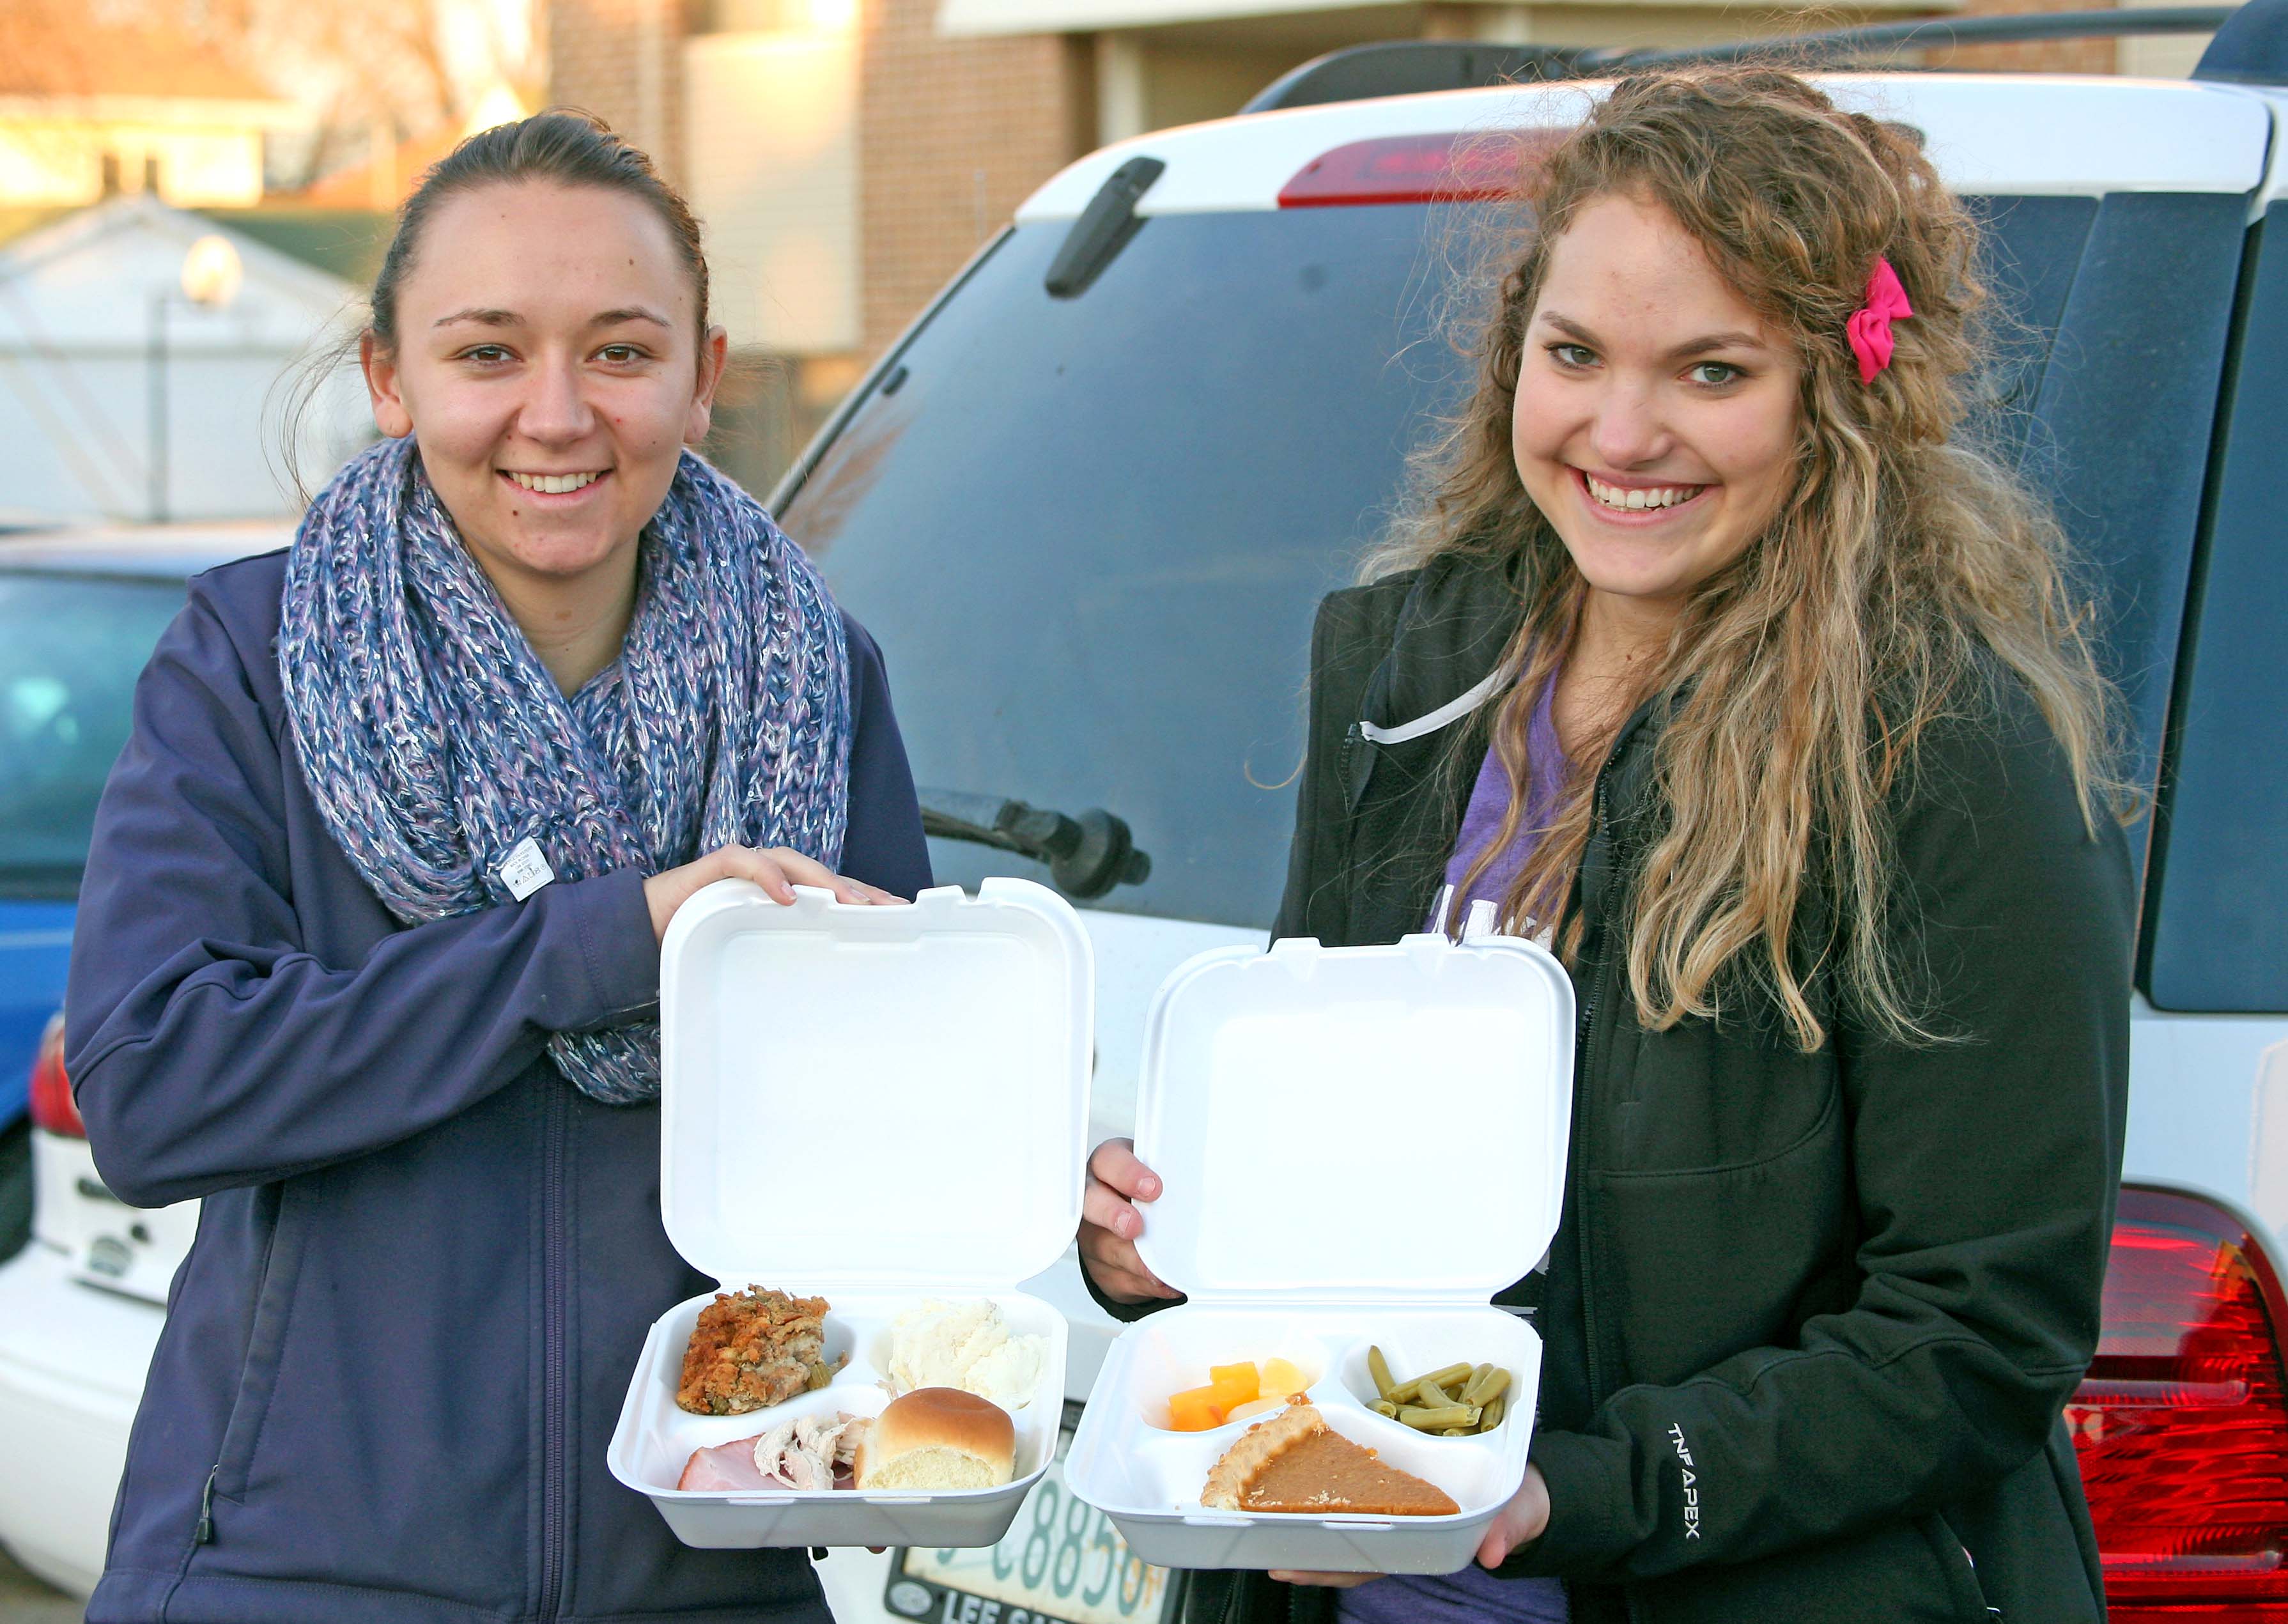 UNK senior biology majors Whitney Nelson, left, and Kelsie Musil deliver a Thanksgiving meal to a Kearney resident Monday during UNK Campus Kitchen's TurkeyPalooza. During TurkeyPalooza, student volunteers delivered nearly 100 meals to residents in need. (Photo by Sara Giboney/UNK News)